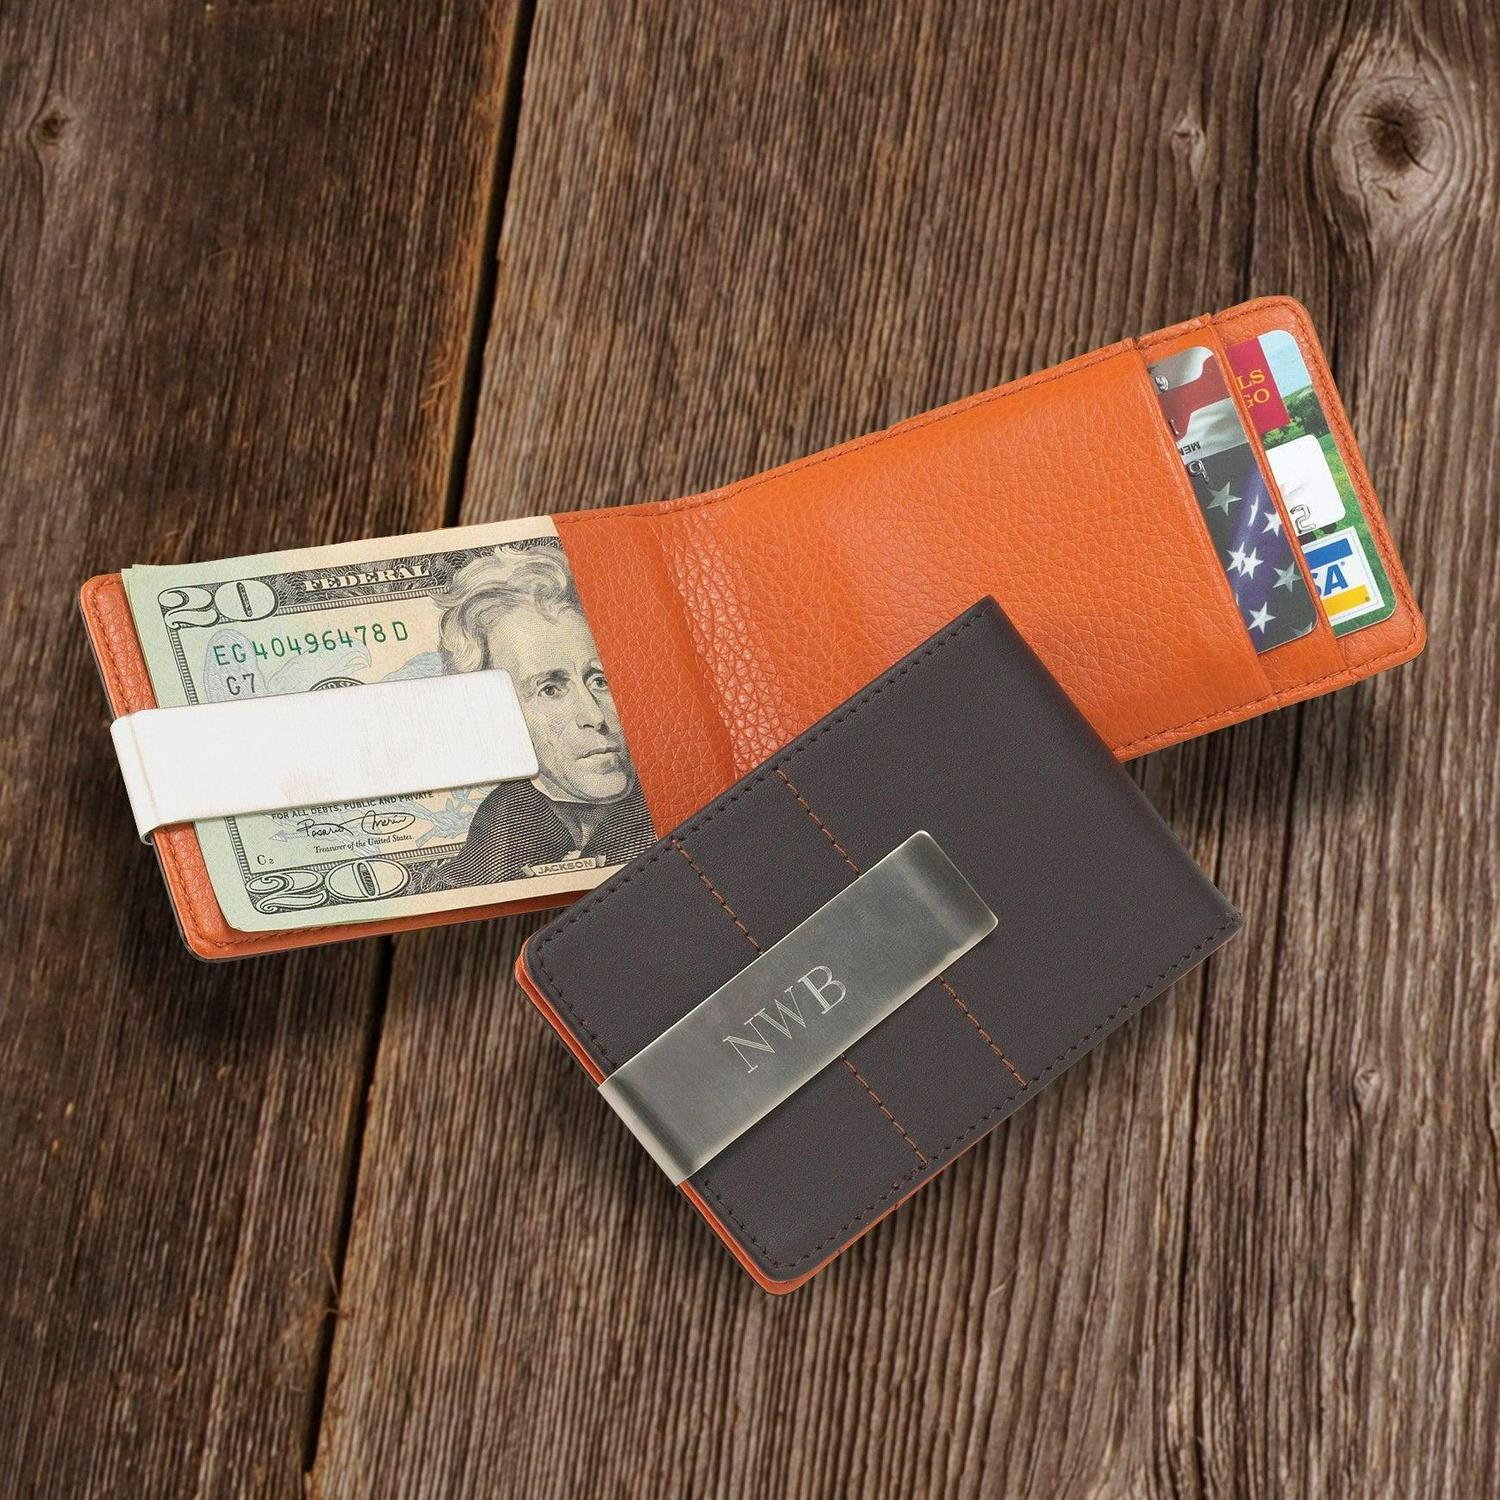 Monogram Wallet and Money Clip - Leather